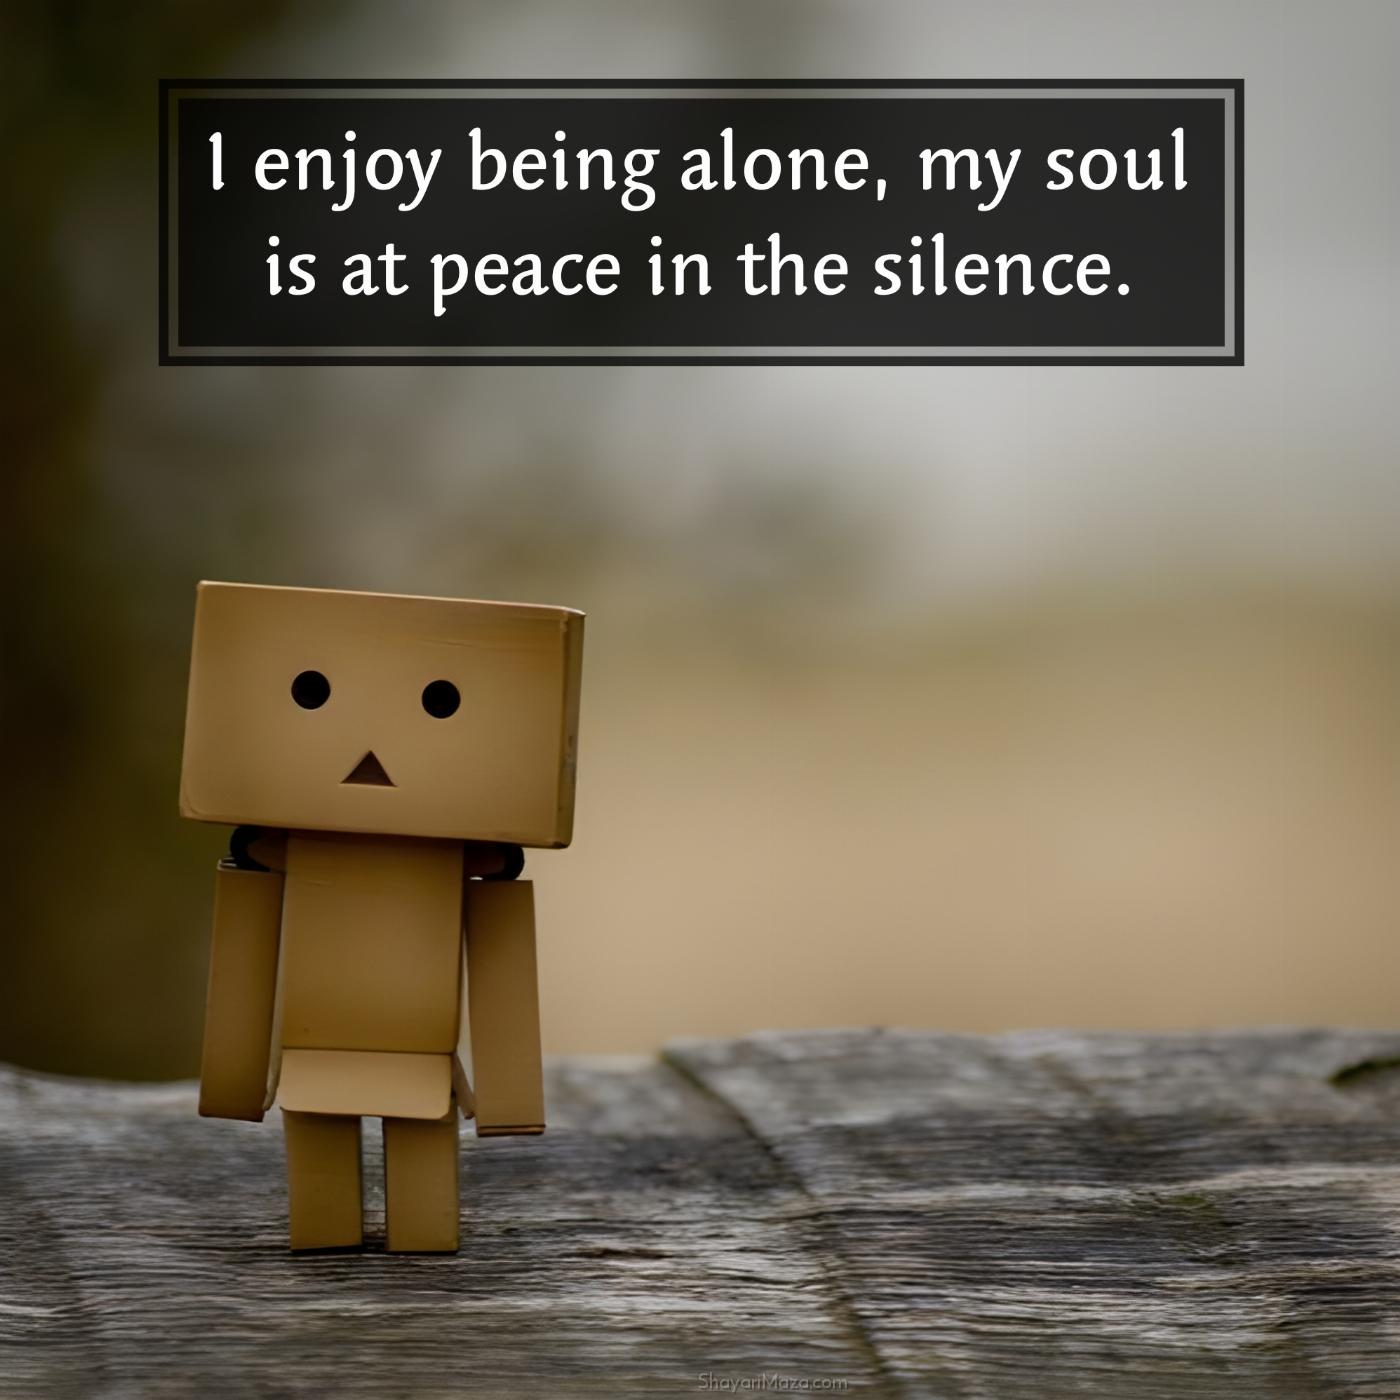 I enjoy being alone my soul is at peace in the silence